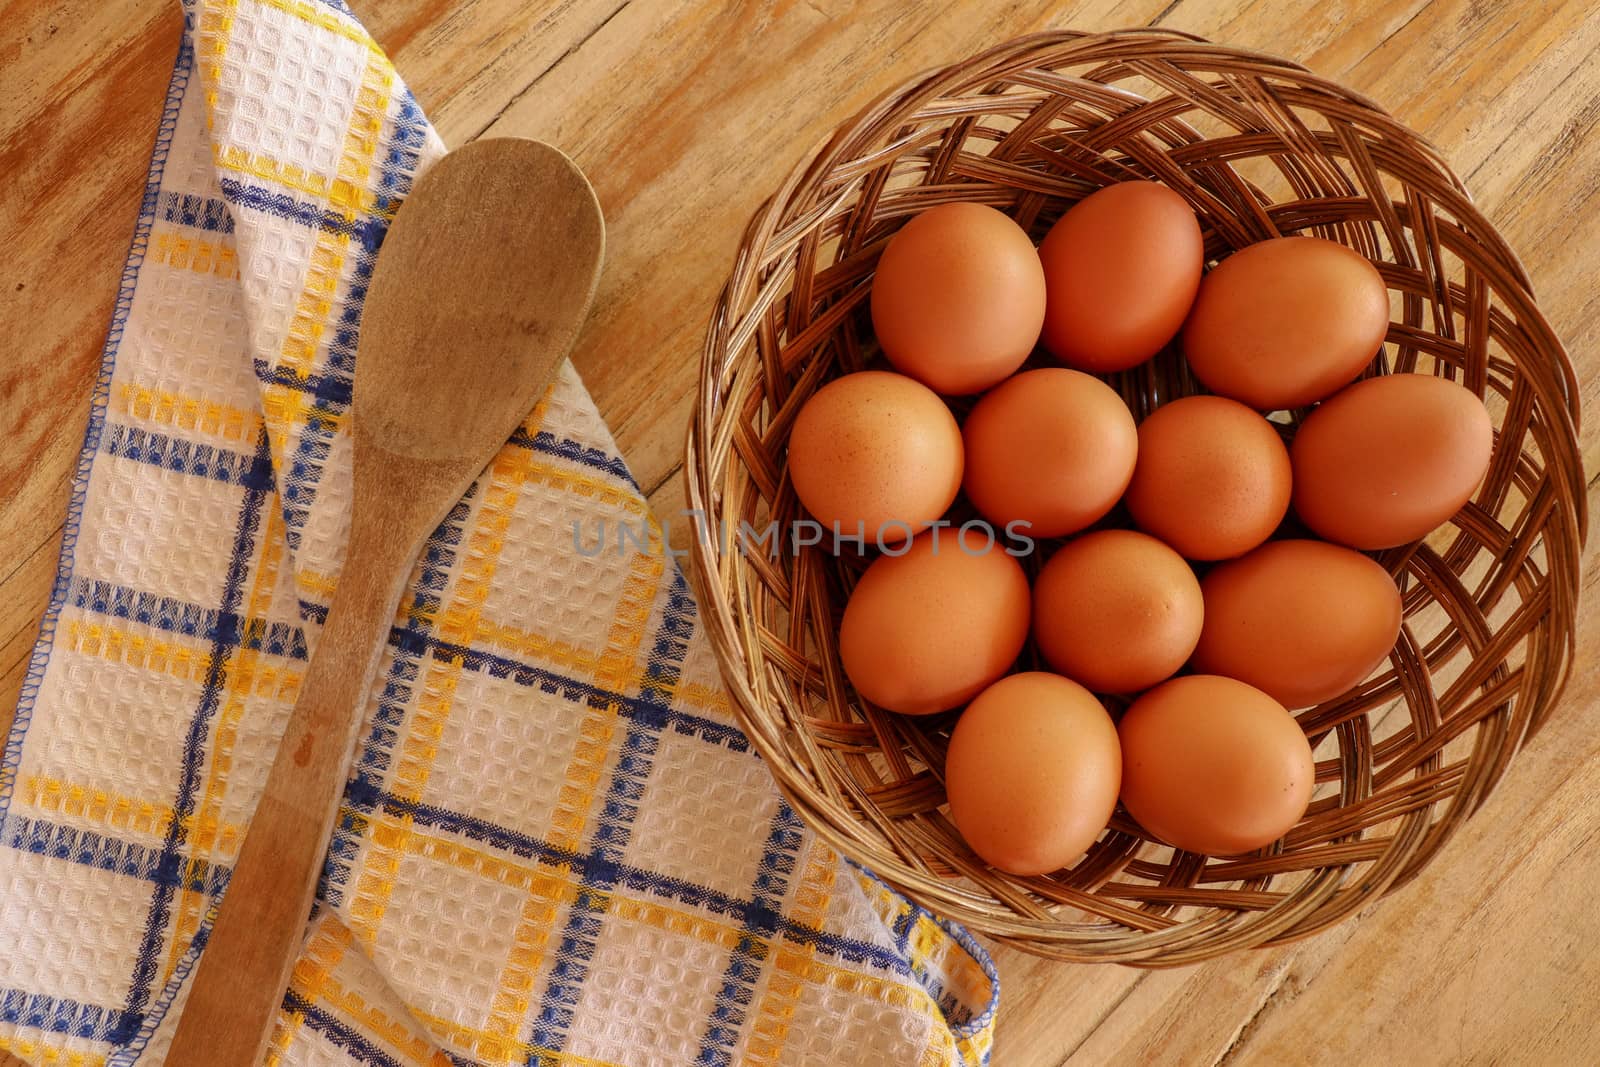 Top view of brown eggs in a wicker basket. Eggs in a wooden bask by Sanatana2008